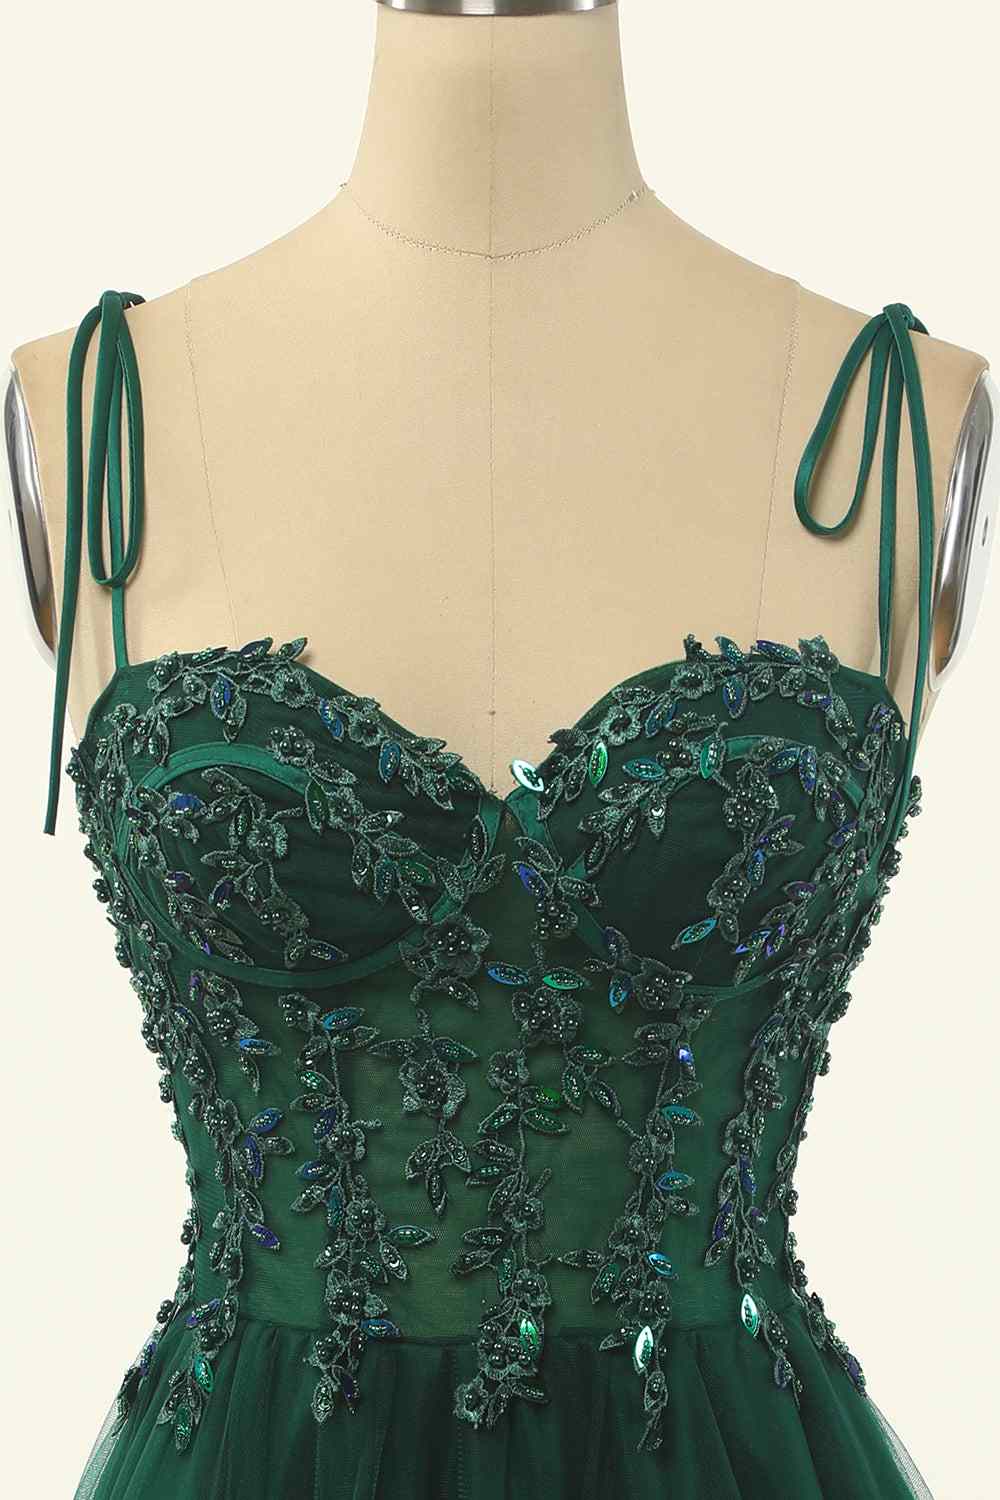 Dark Green A-line Bow Tie Straps Lace-Up Applique Mini Homecoming Dress